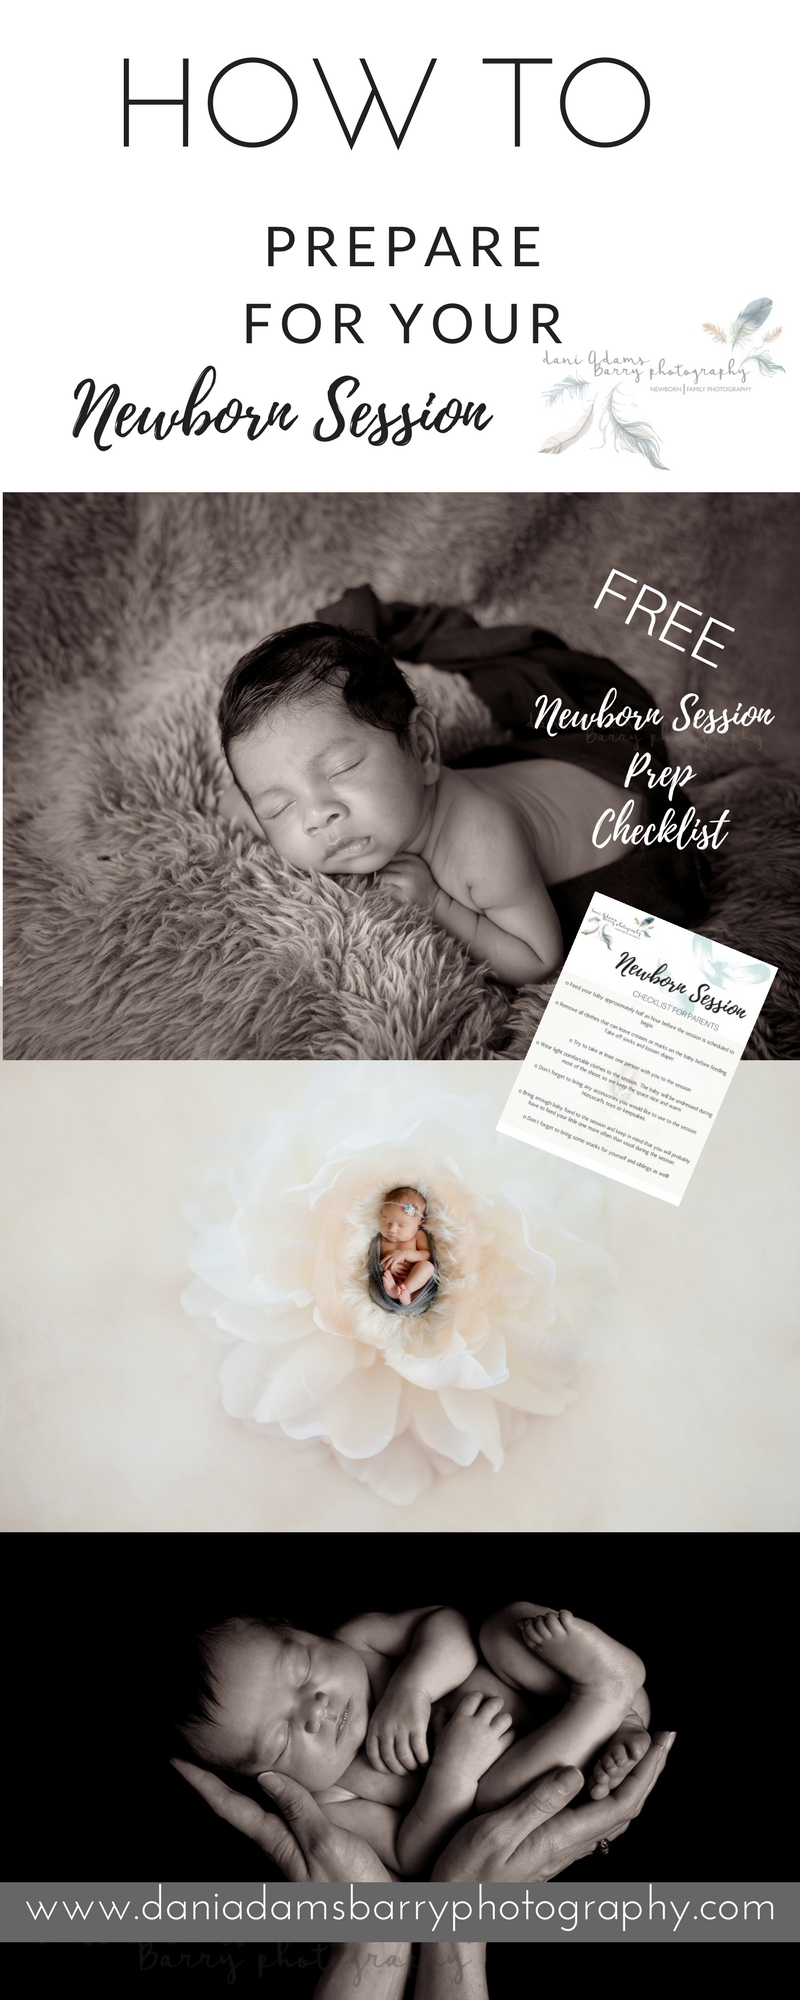 How to Prepare for your Newborn Photography Session- Tips and tricks on how to prepare for your Newborn Session. PLUS, FREE Newborn Session Prep checklist for parents. PIN NOW!